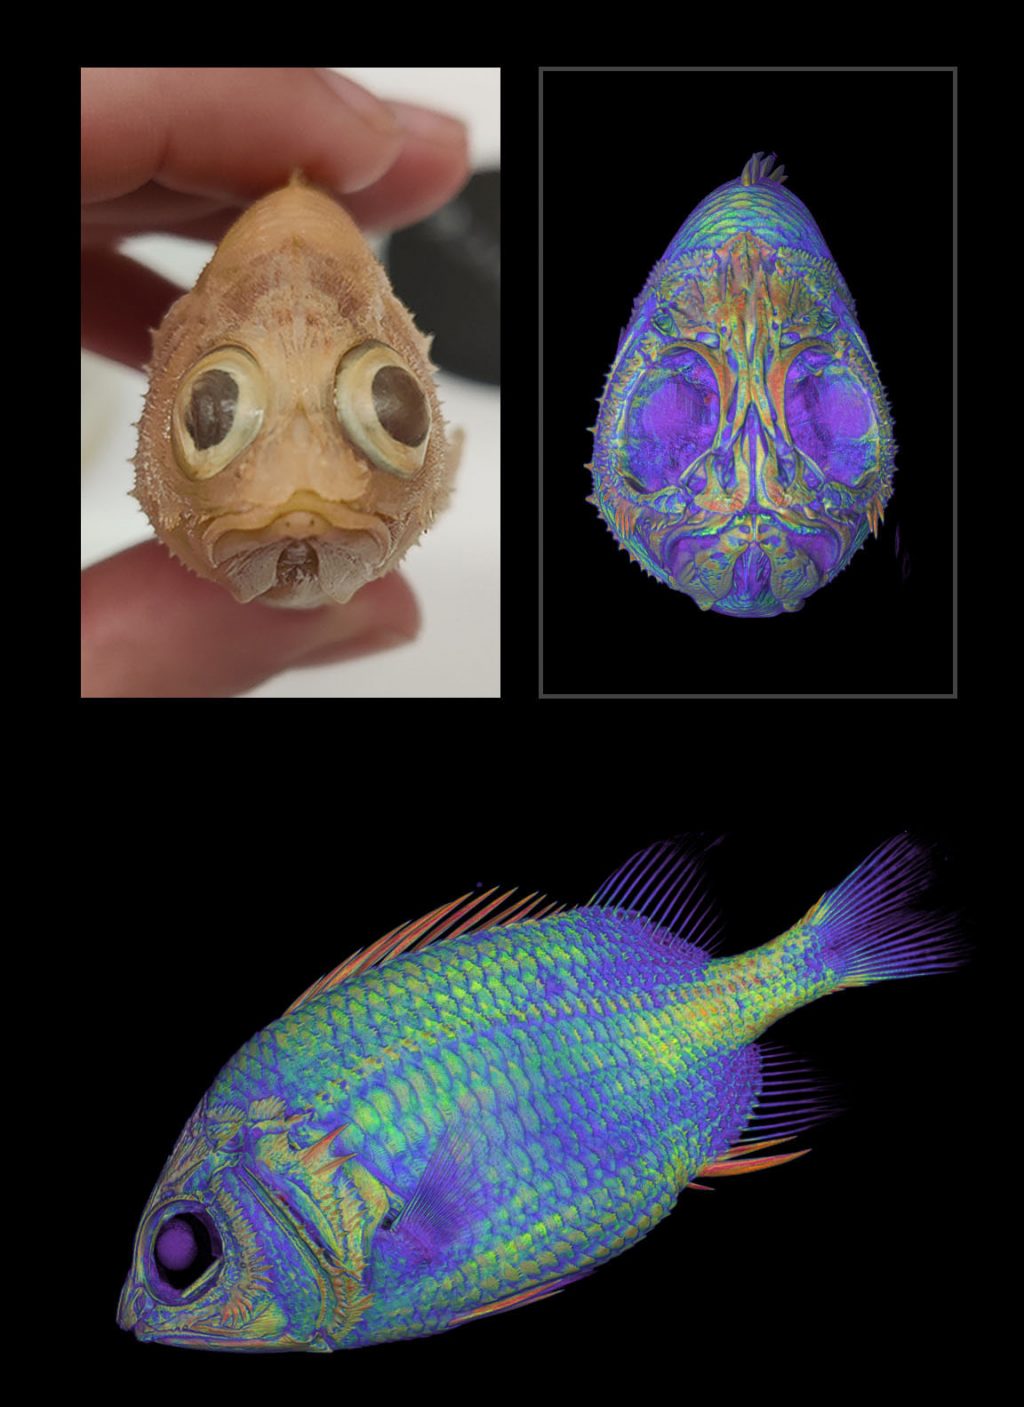 Fish specimen side by side with its digital reconstruction, the latter seen from two angles.